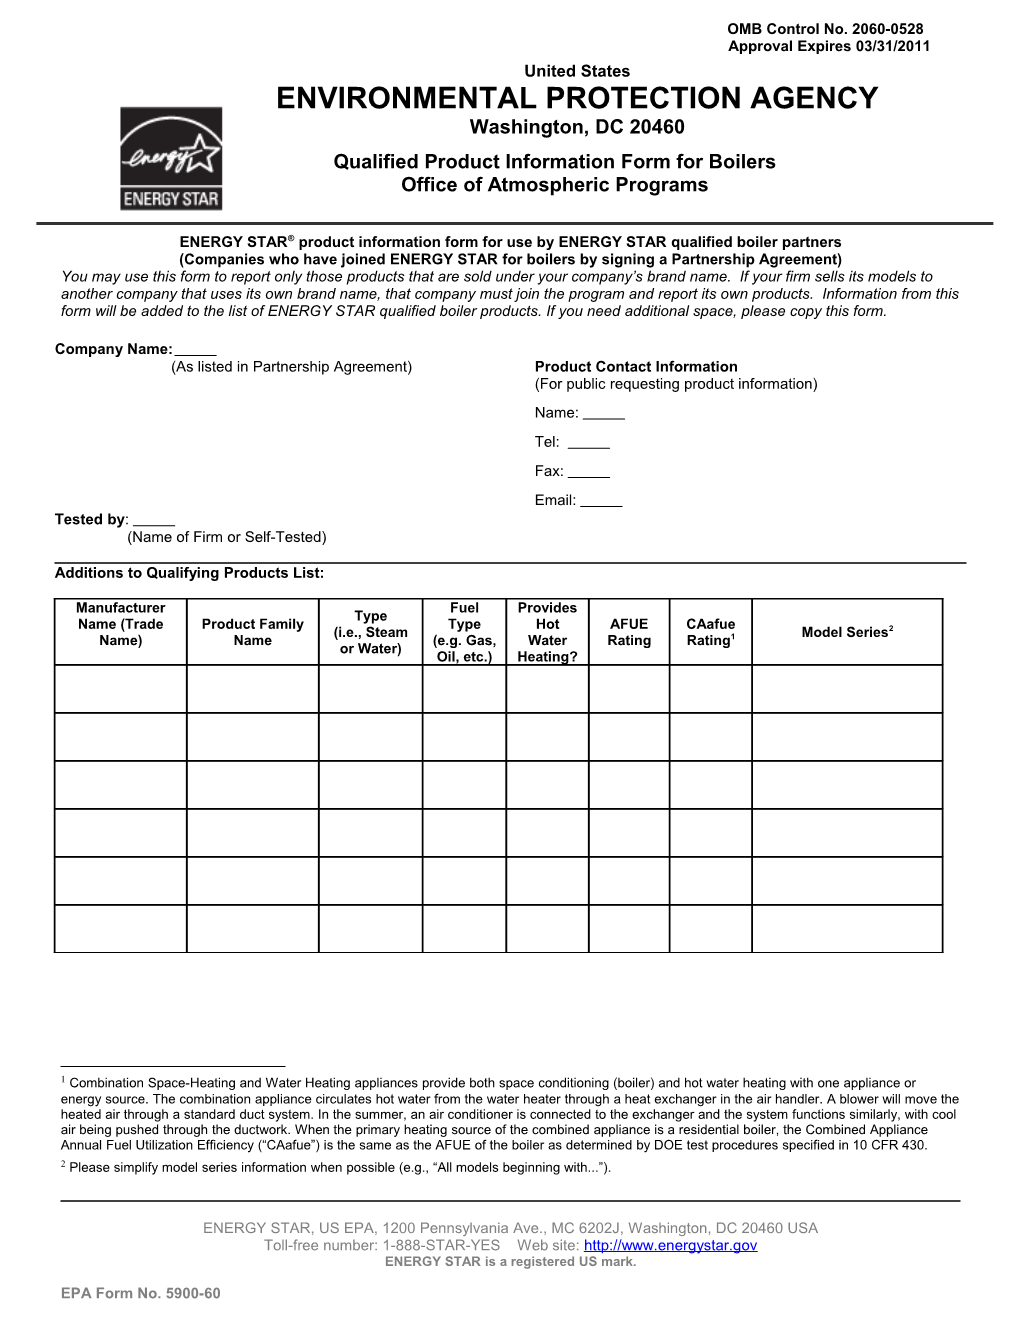 Qualified Product Information Form for Boilers